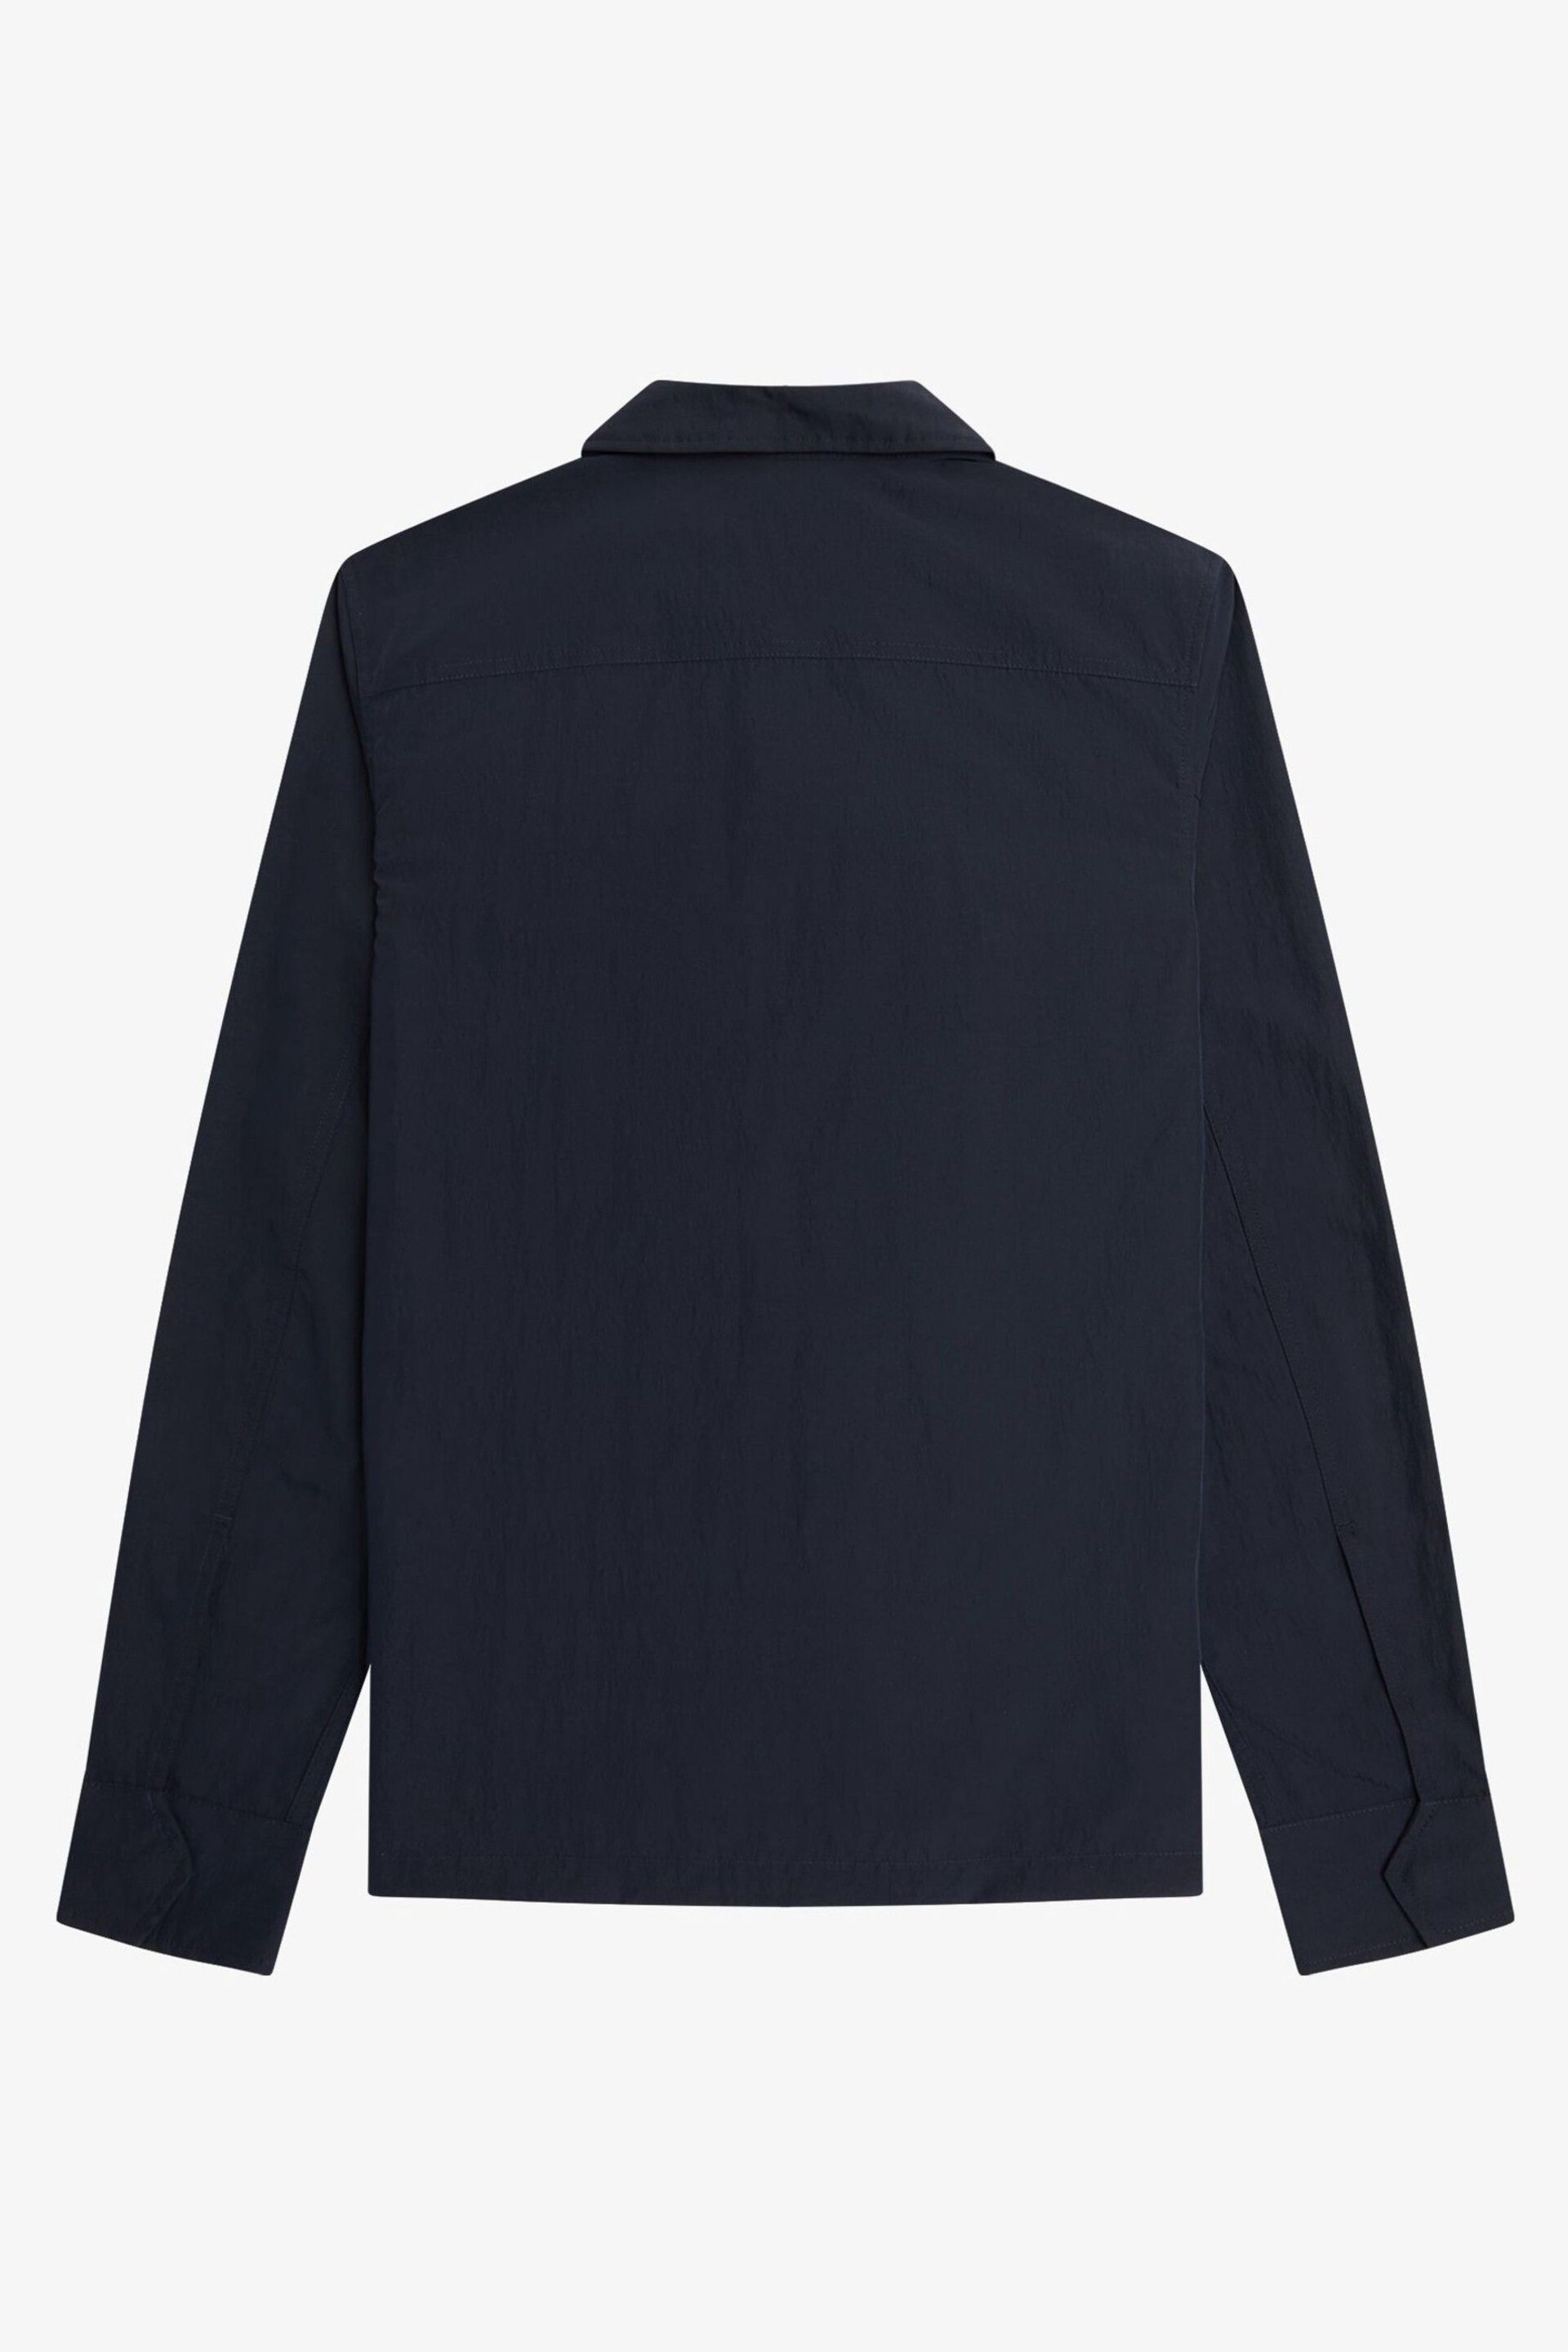 Fred Perry Zip Through Lightweight Jacket - Image 7 of 8